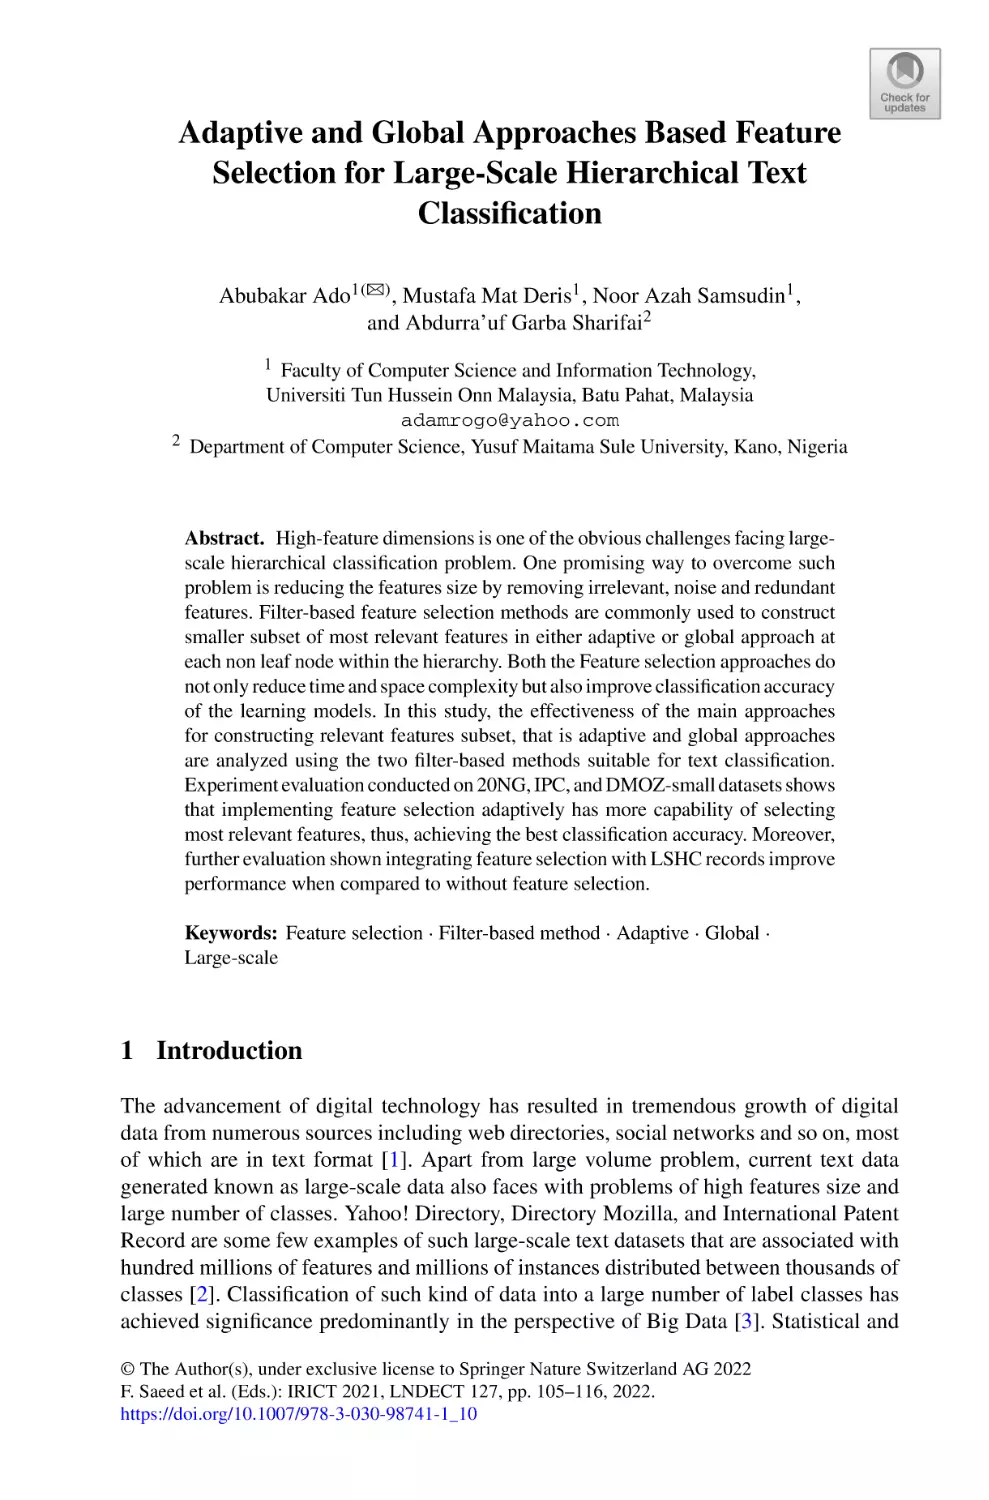 Adaptive and Global Approaches Based Feature Selection for Large-Scale Hierarchical Text Classification
1 Introduction